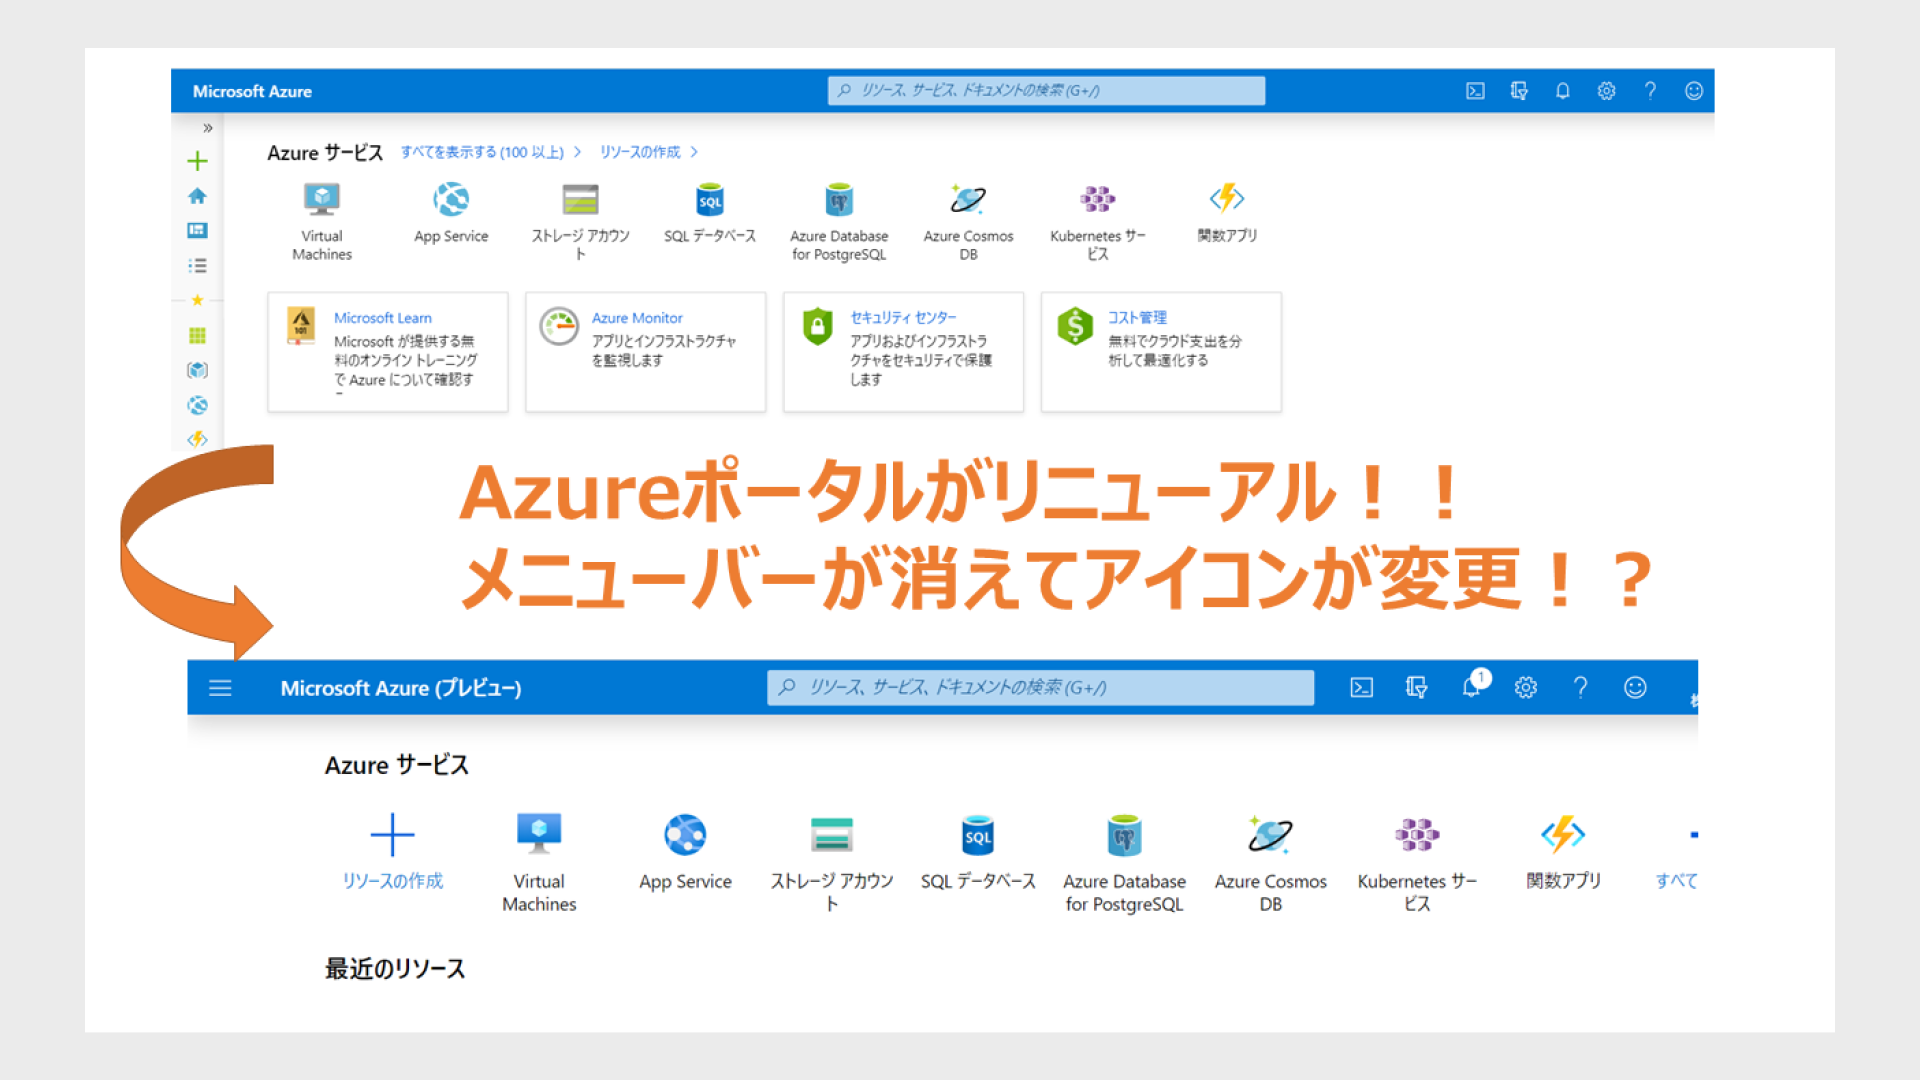 azblob://2022/11/11/eyecatch/2019-10-16-menu-bar-and-icons-have-changed-in-azure-portal-000.png